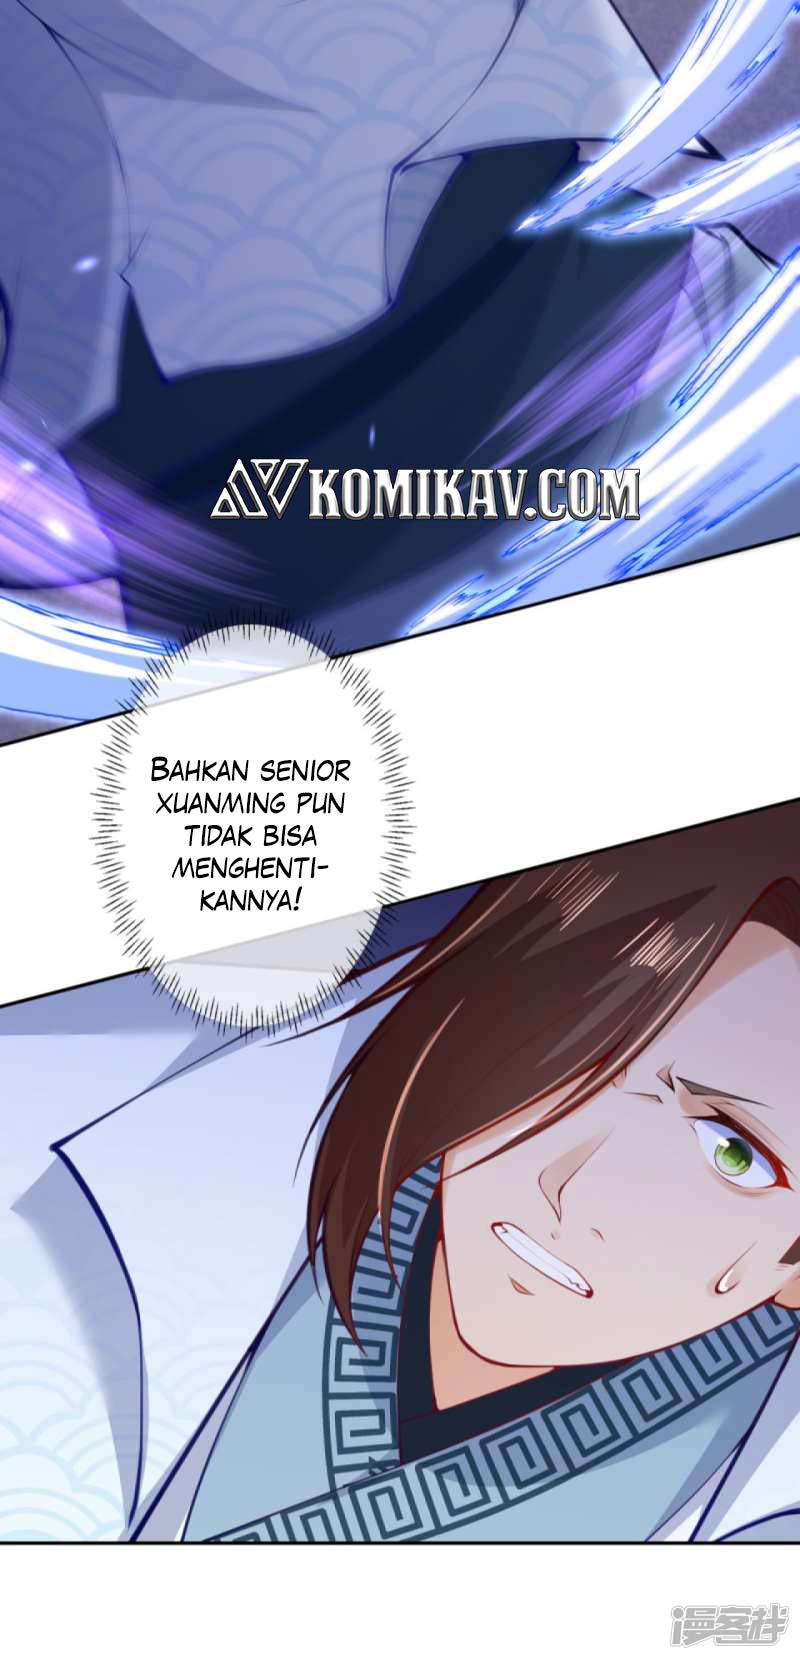 Invincible Sword Domain Chapter 95